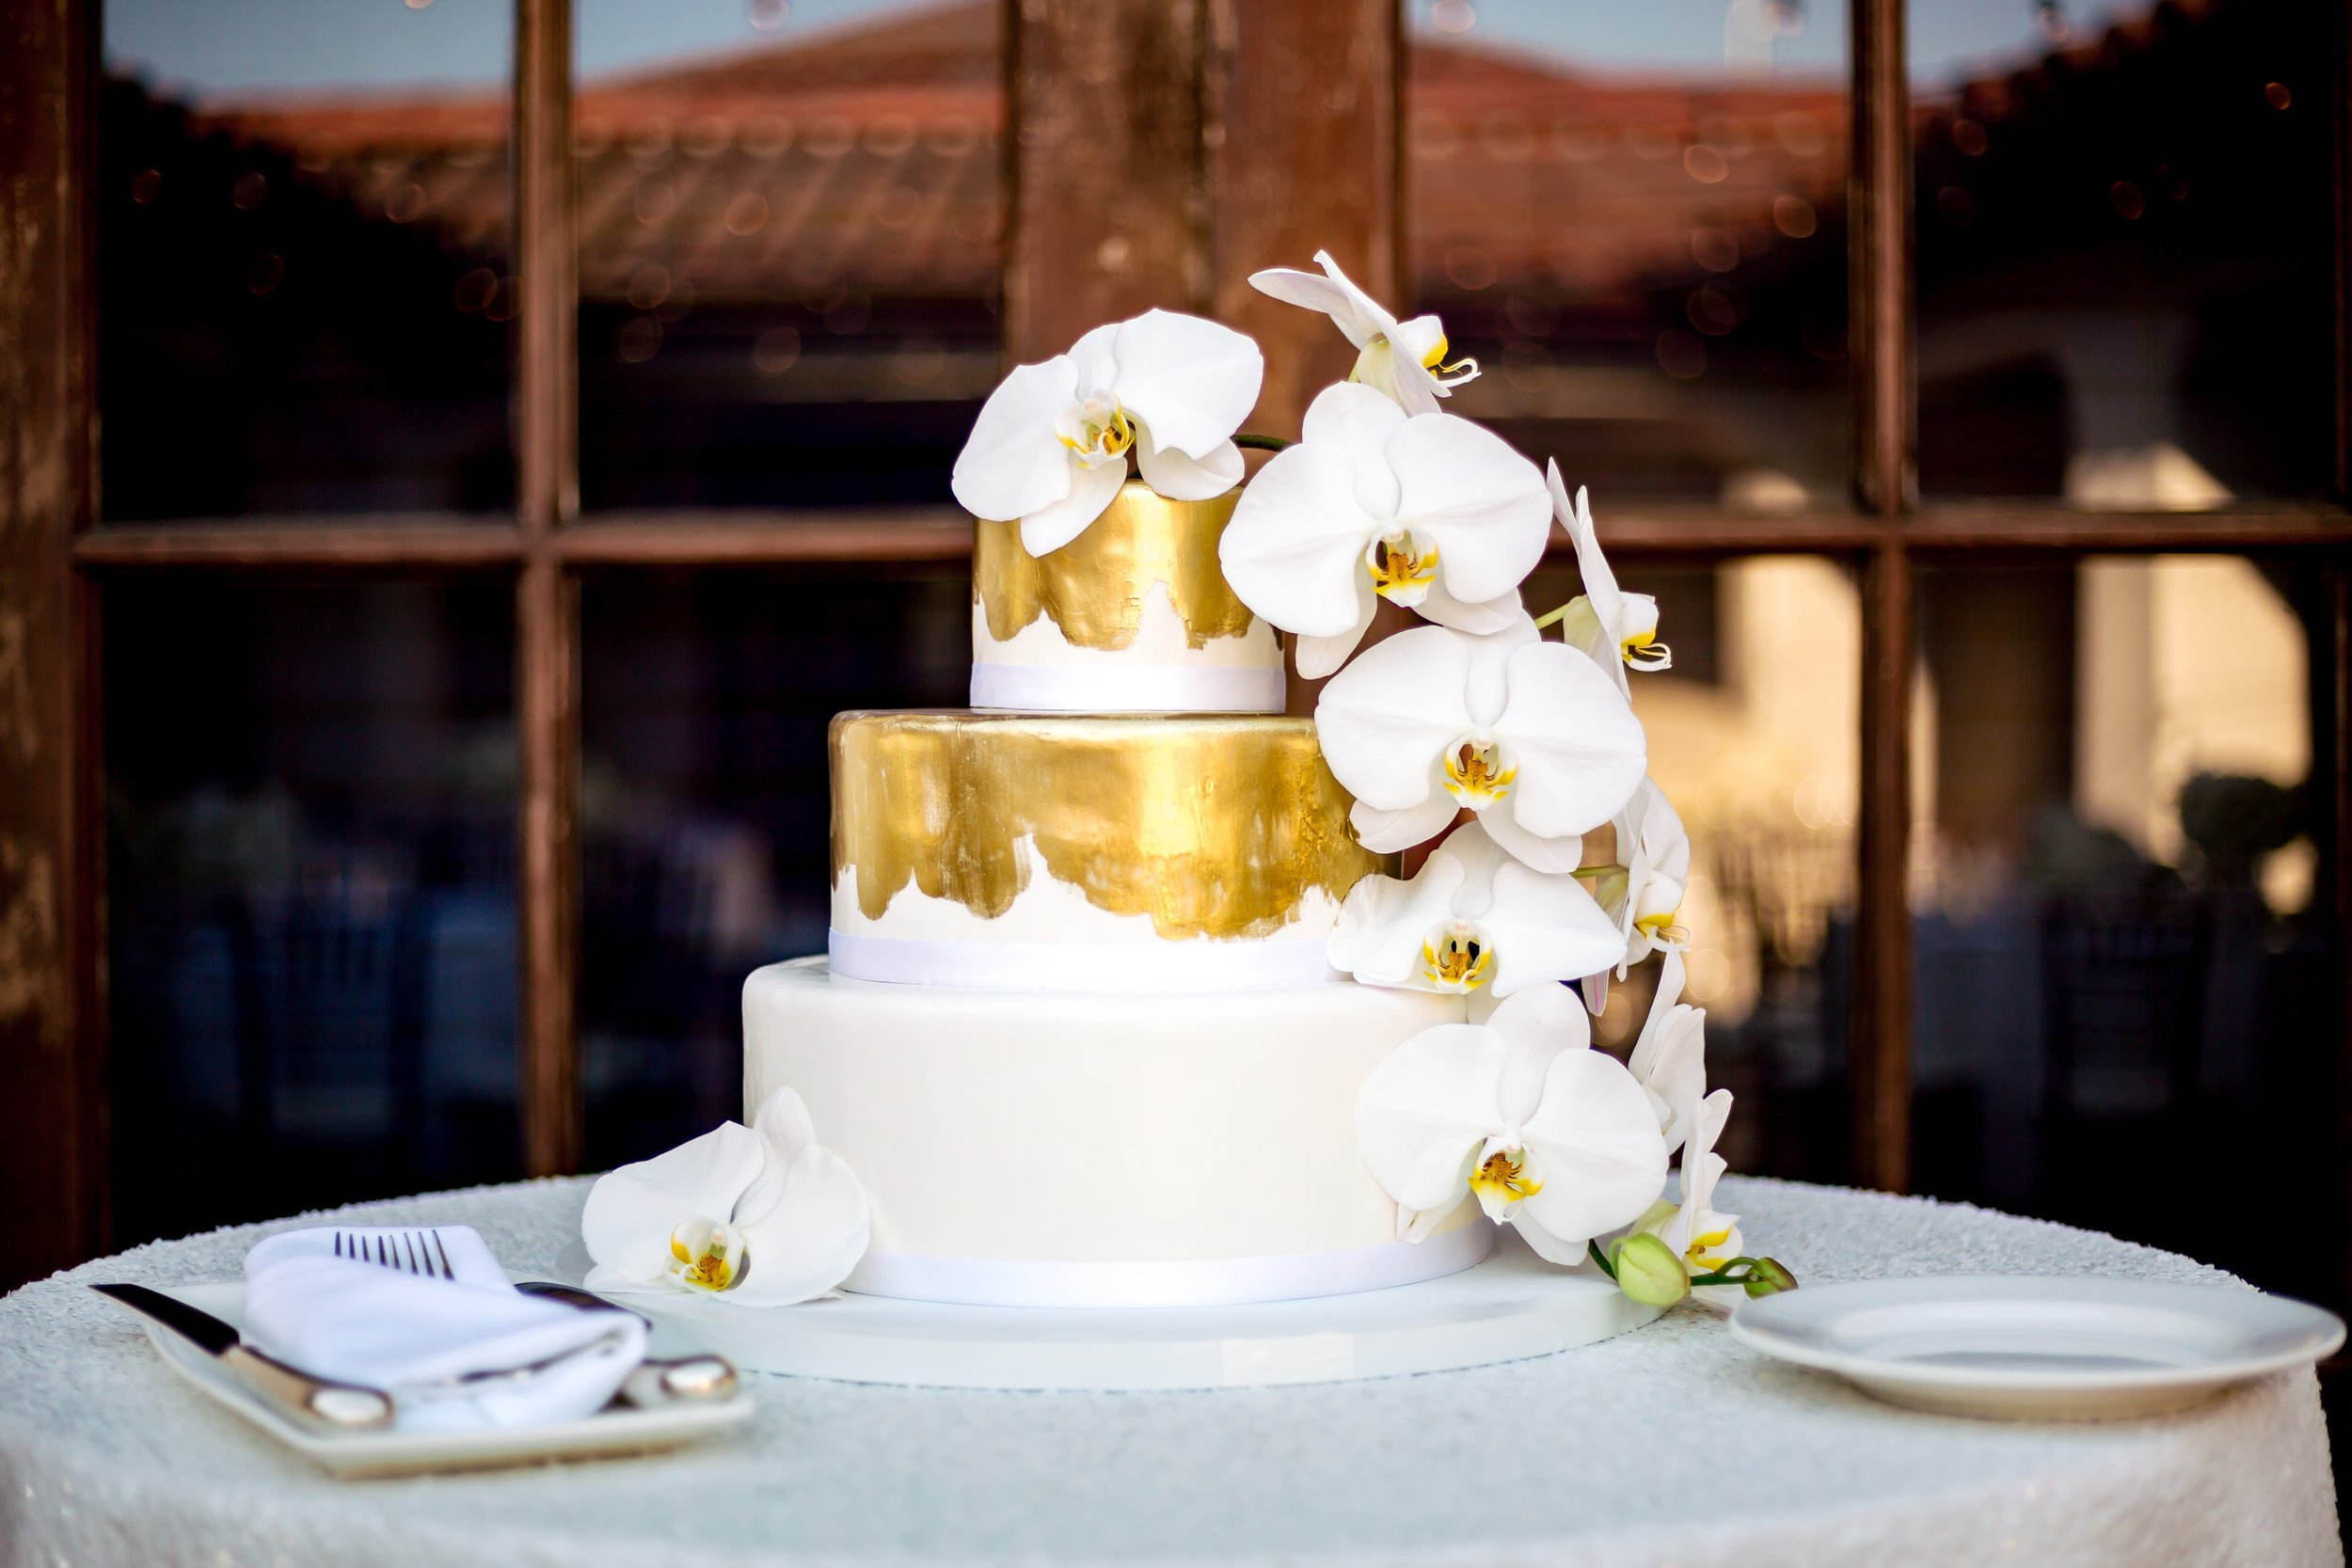 www.santabarbarawedding.com | Lilac Patisserie | Three-Tiered White Wedding Cake with Gold Designs and Large White Flowers